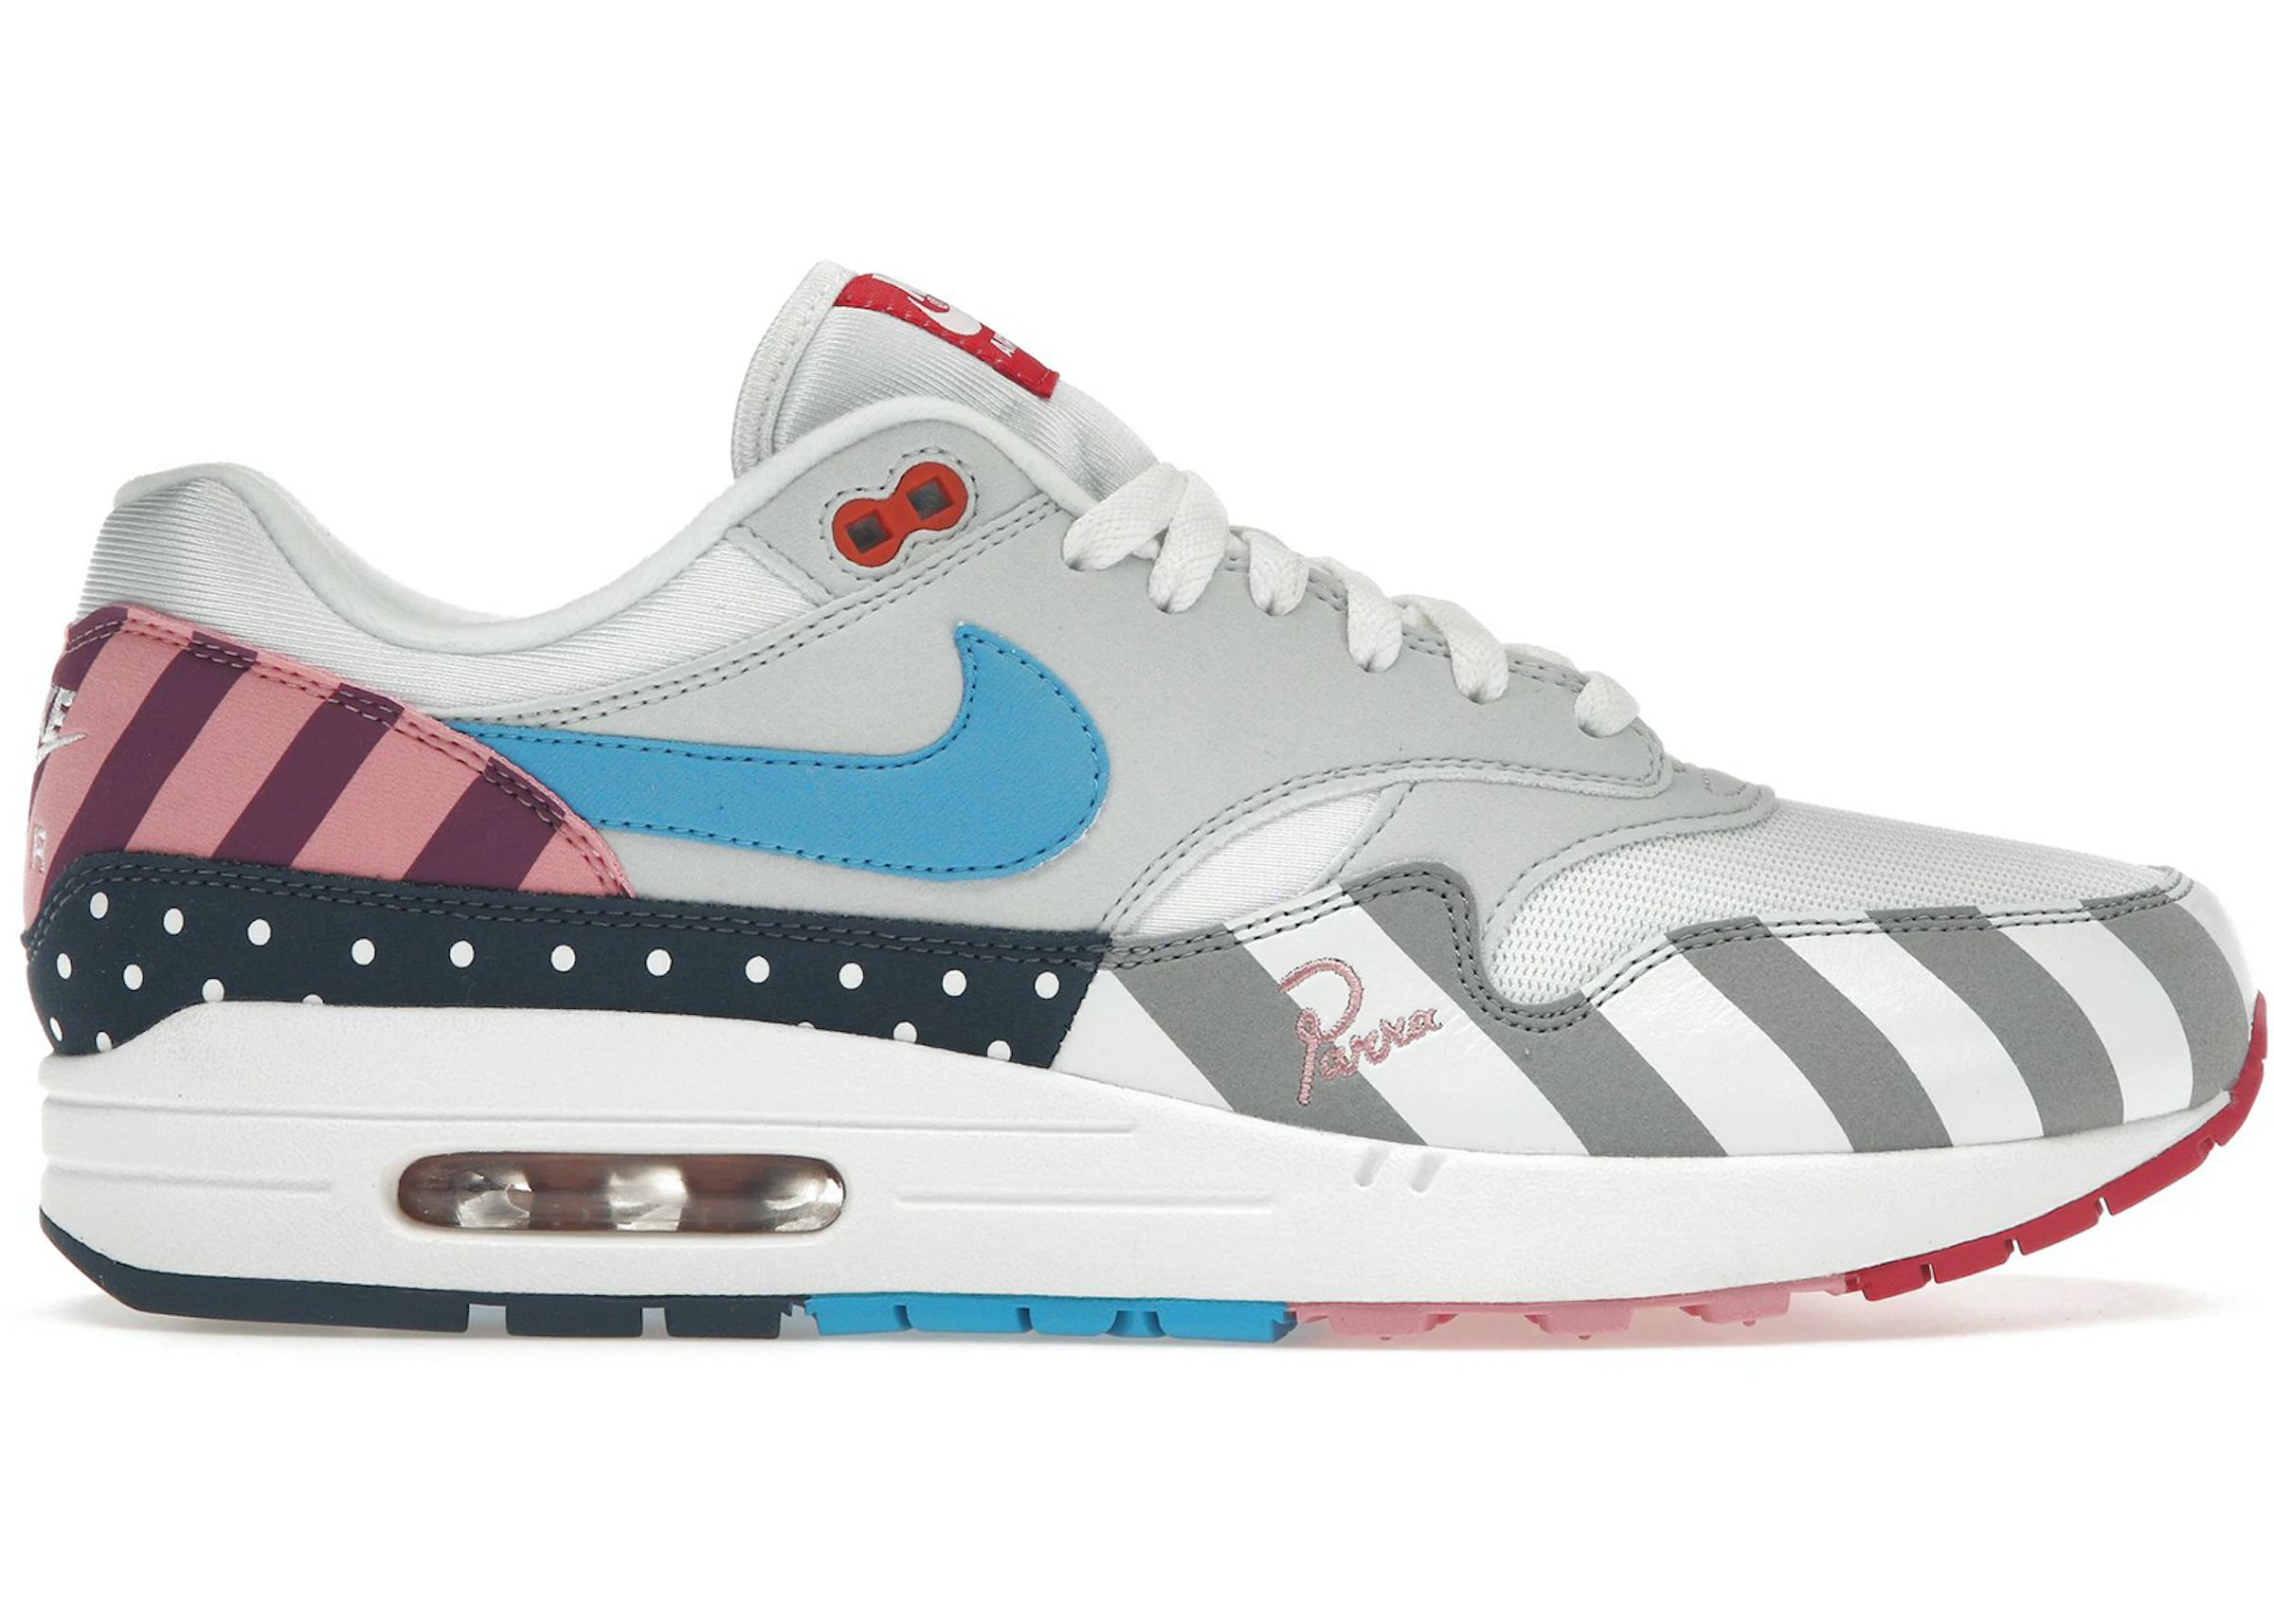 Slecht Dader Of anders Nike Air Max 1 Parra (2018) - AT3057-100 - US